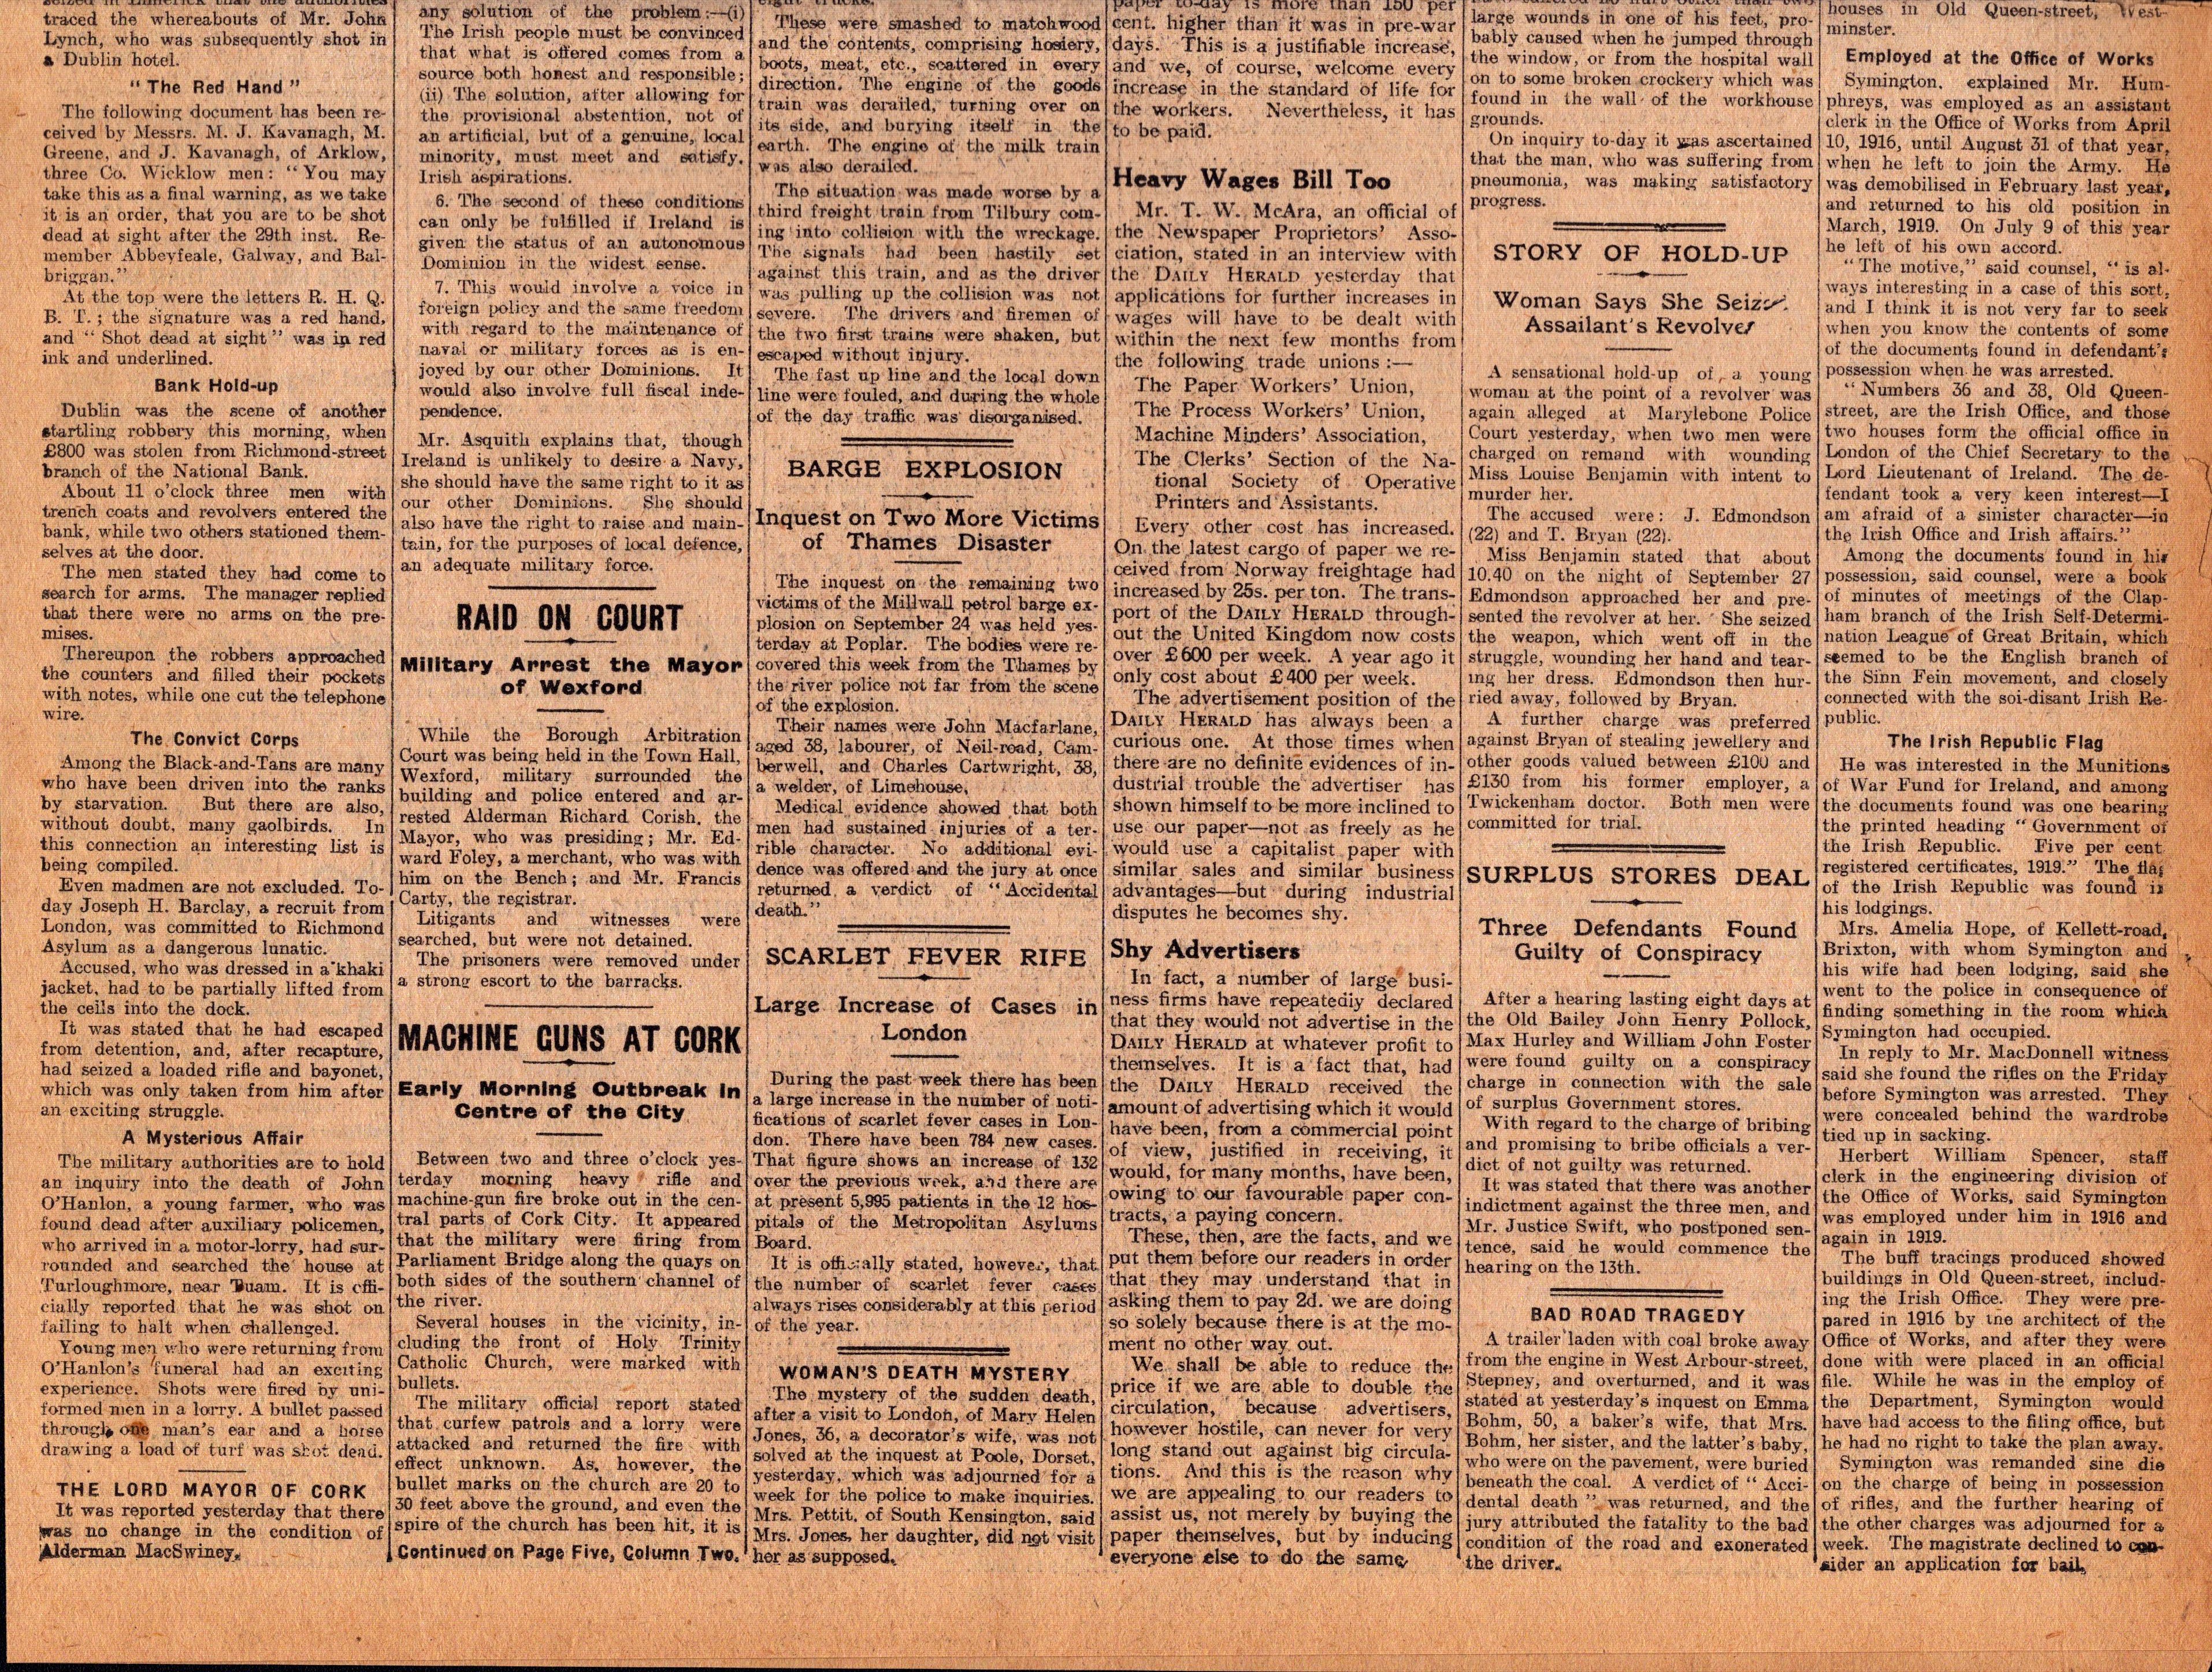 Irish War of Independence News Reports Black & Tans, Hunger Strikes 1920-2. - Image 8 of 8